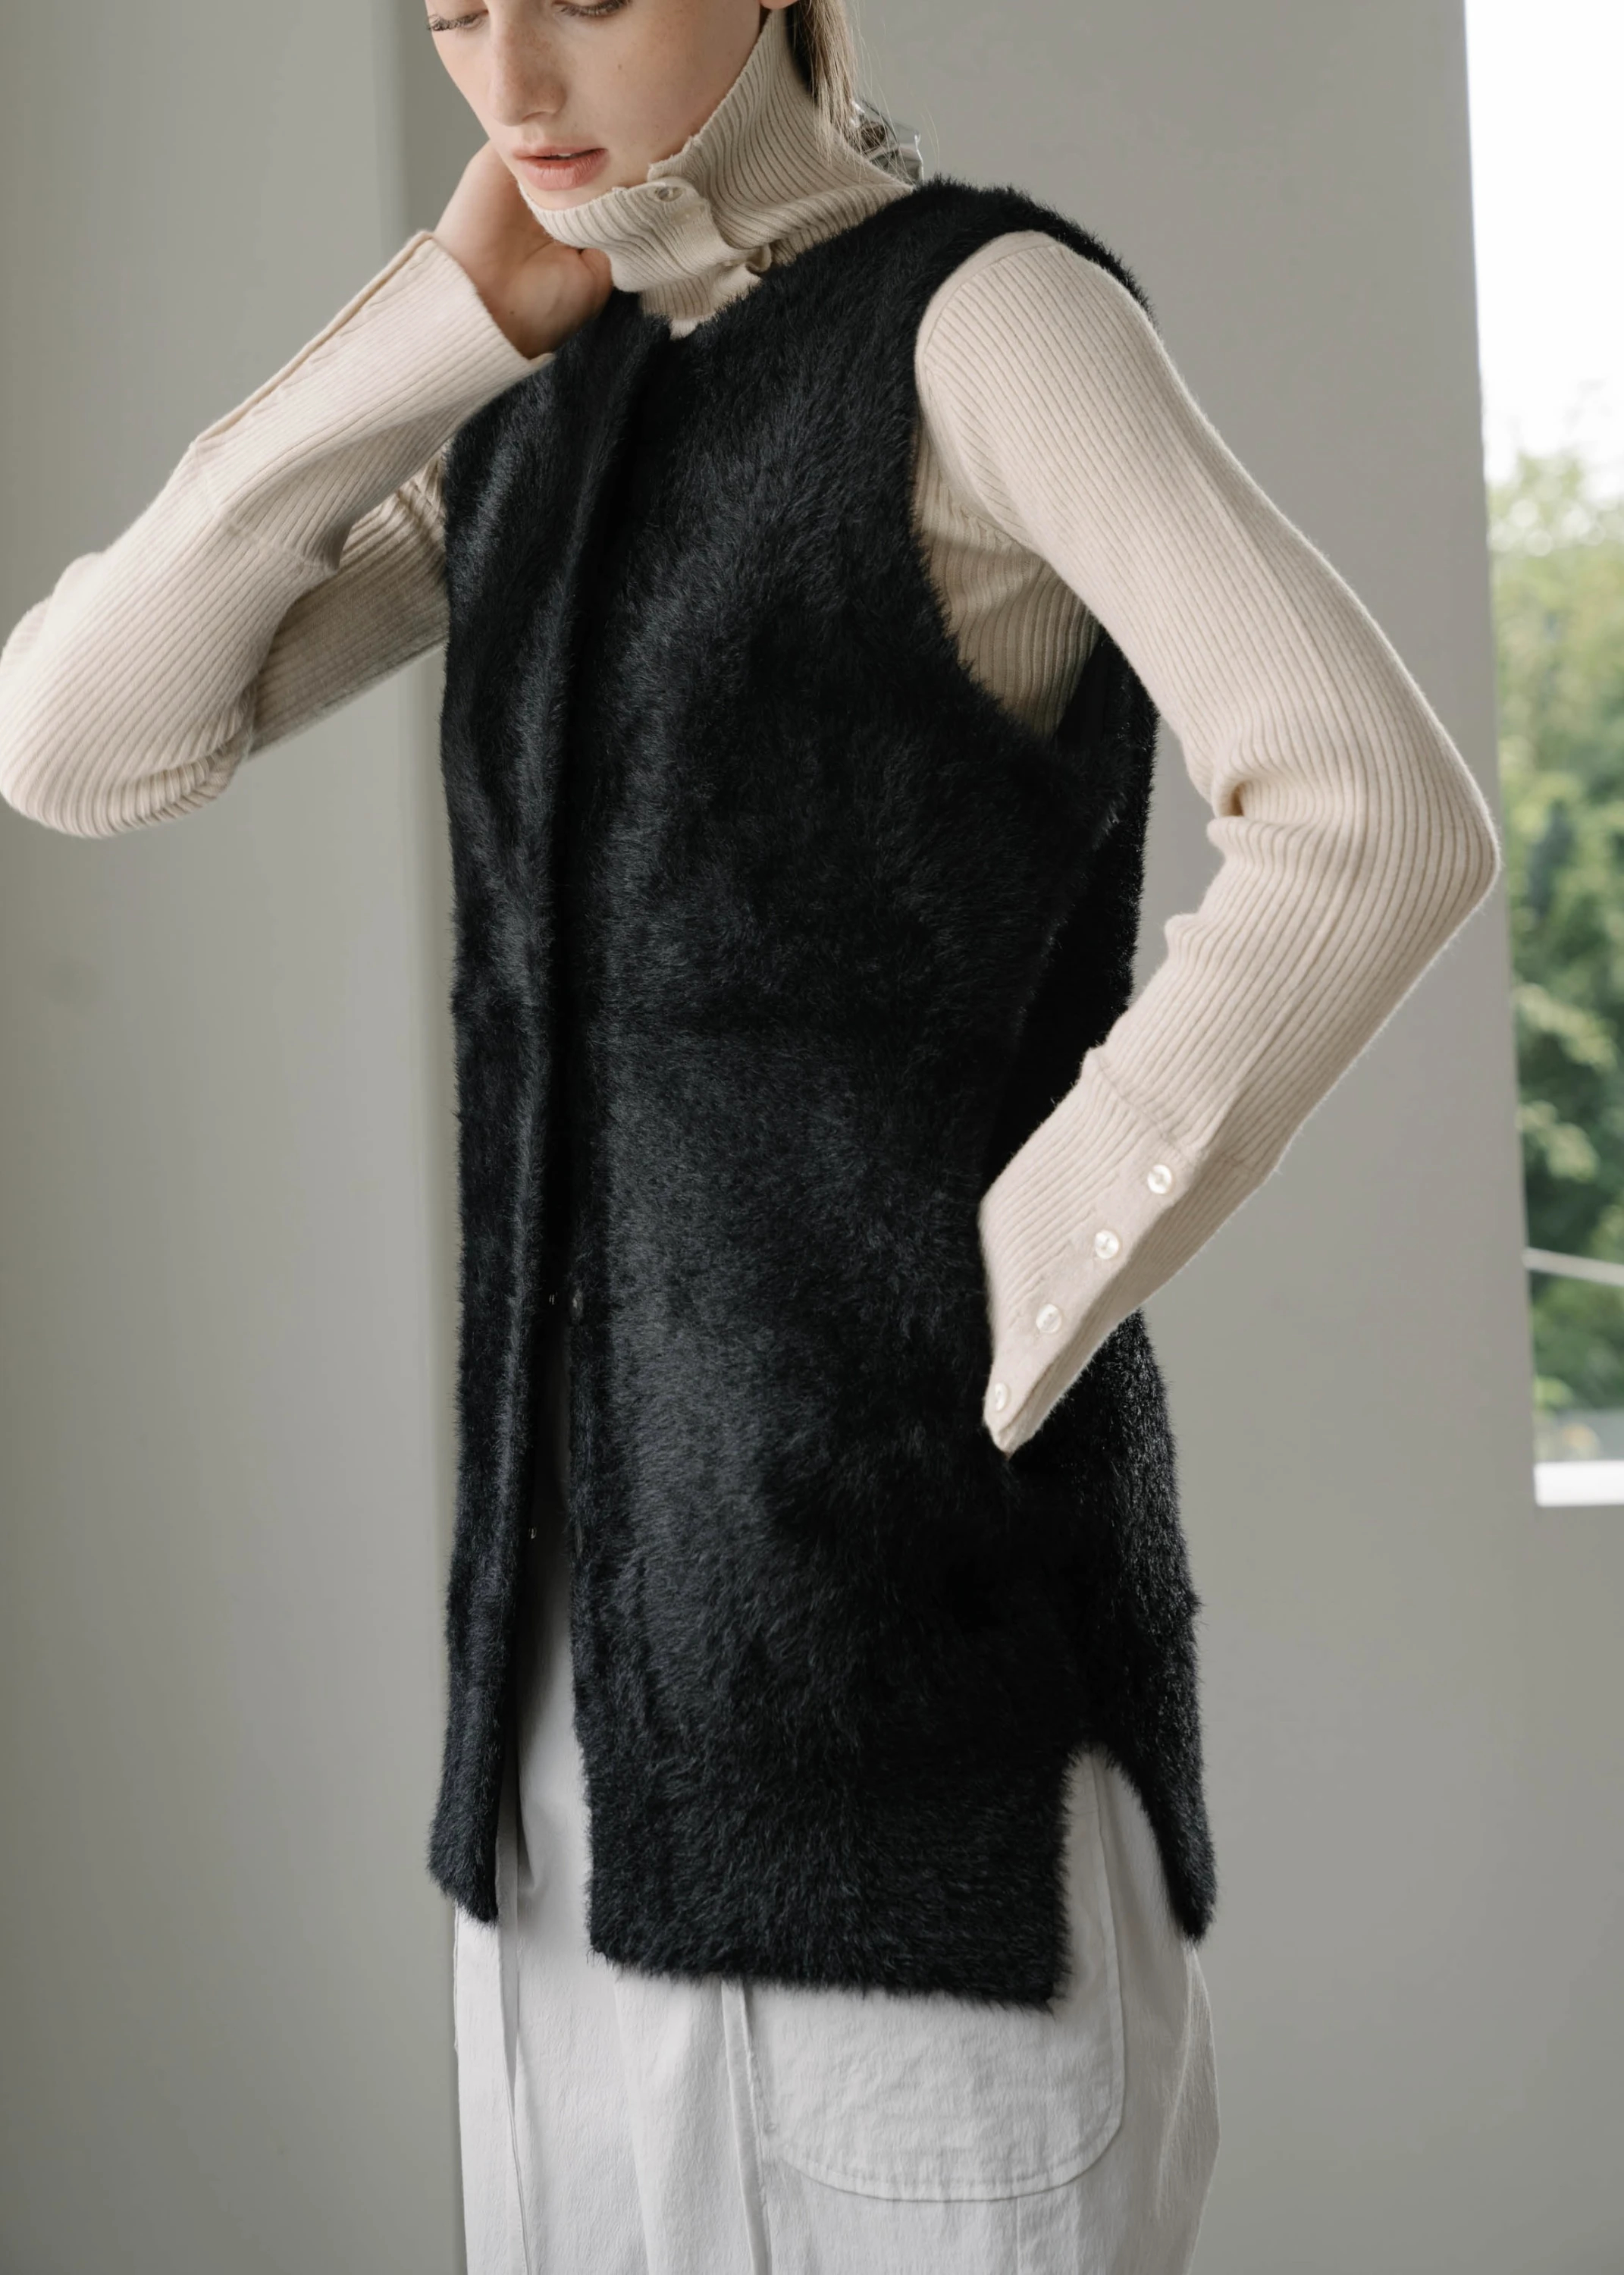 multi way shaggy knit vest / willfully（ウィルフリー）のknit通販